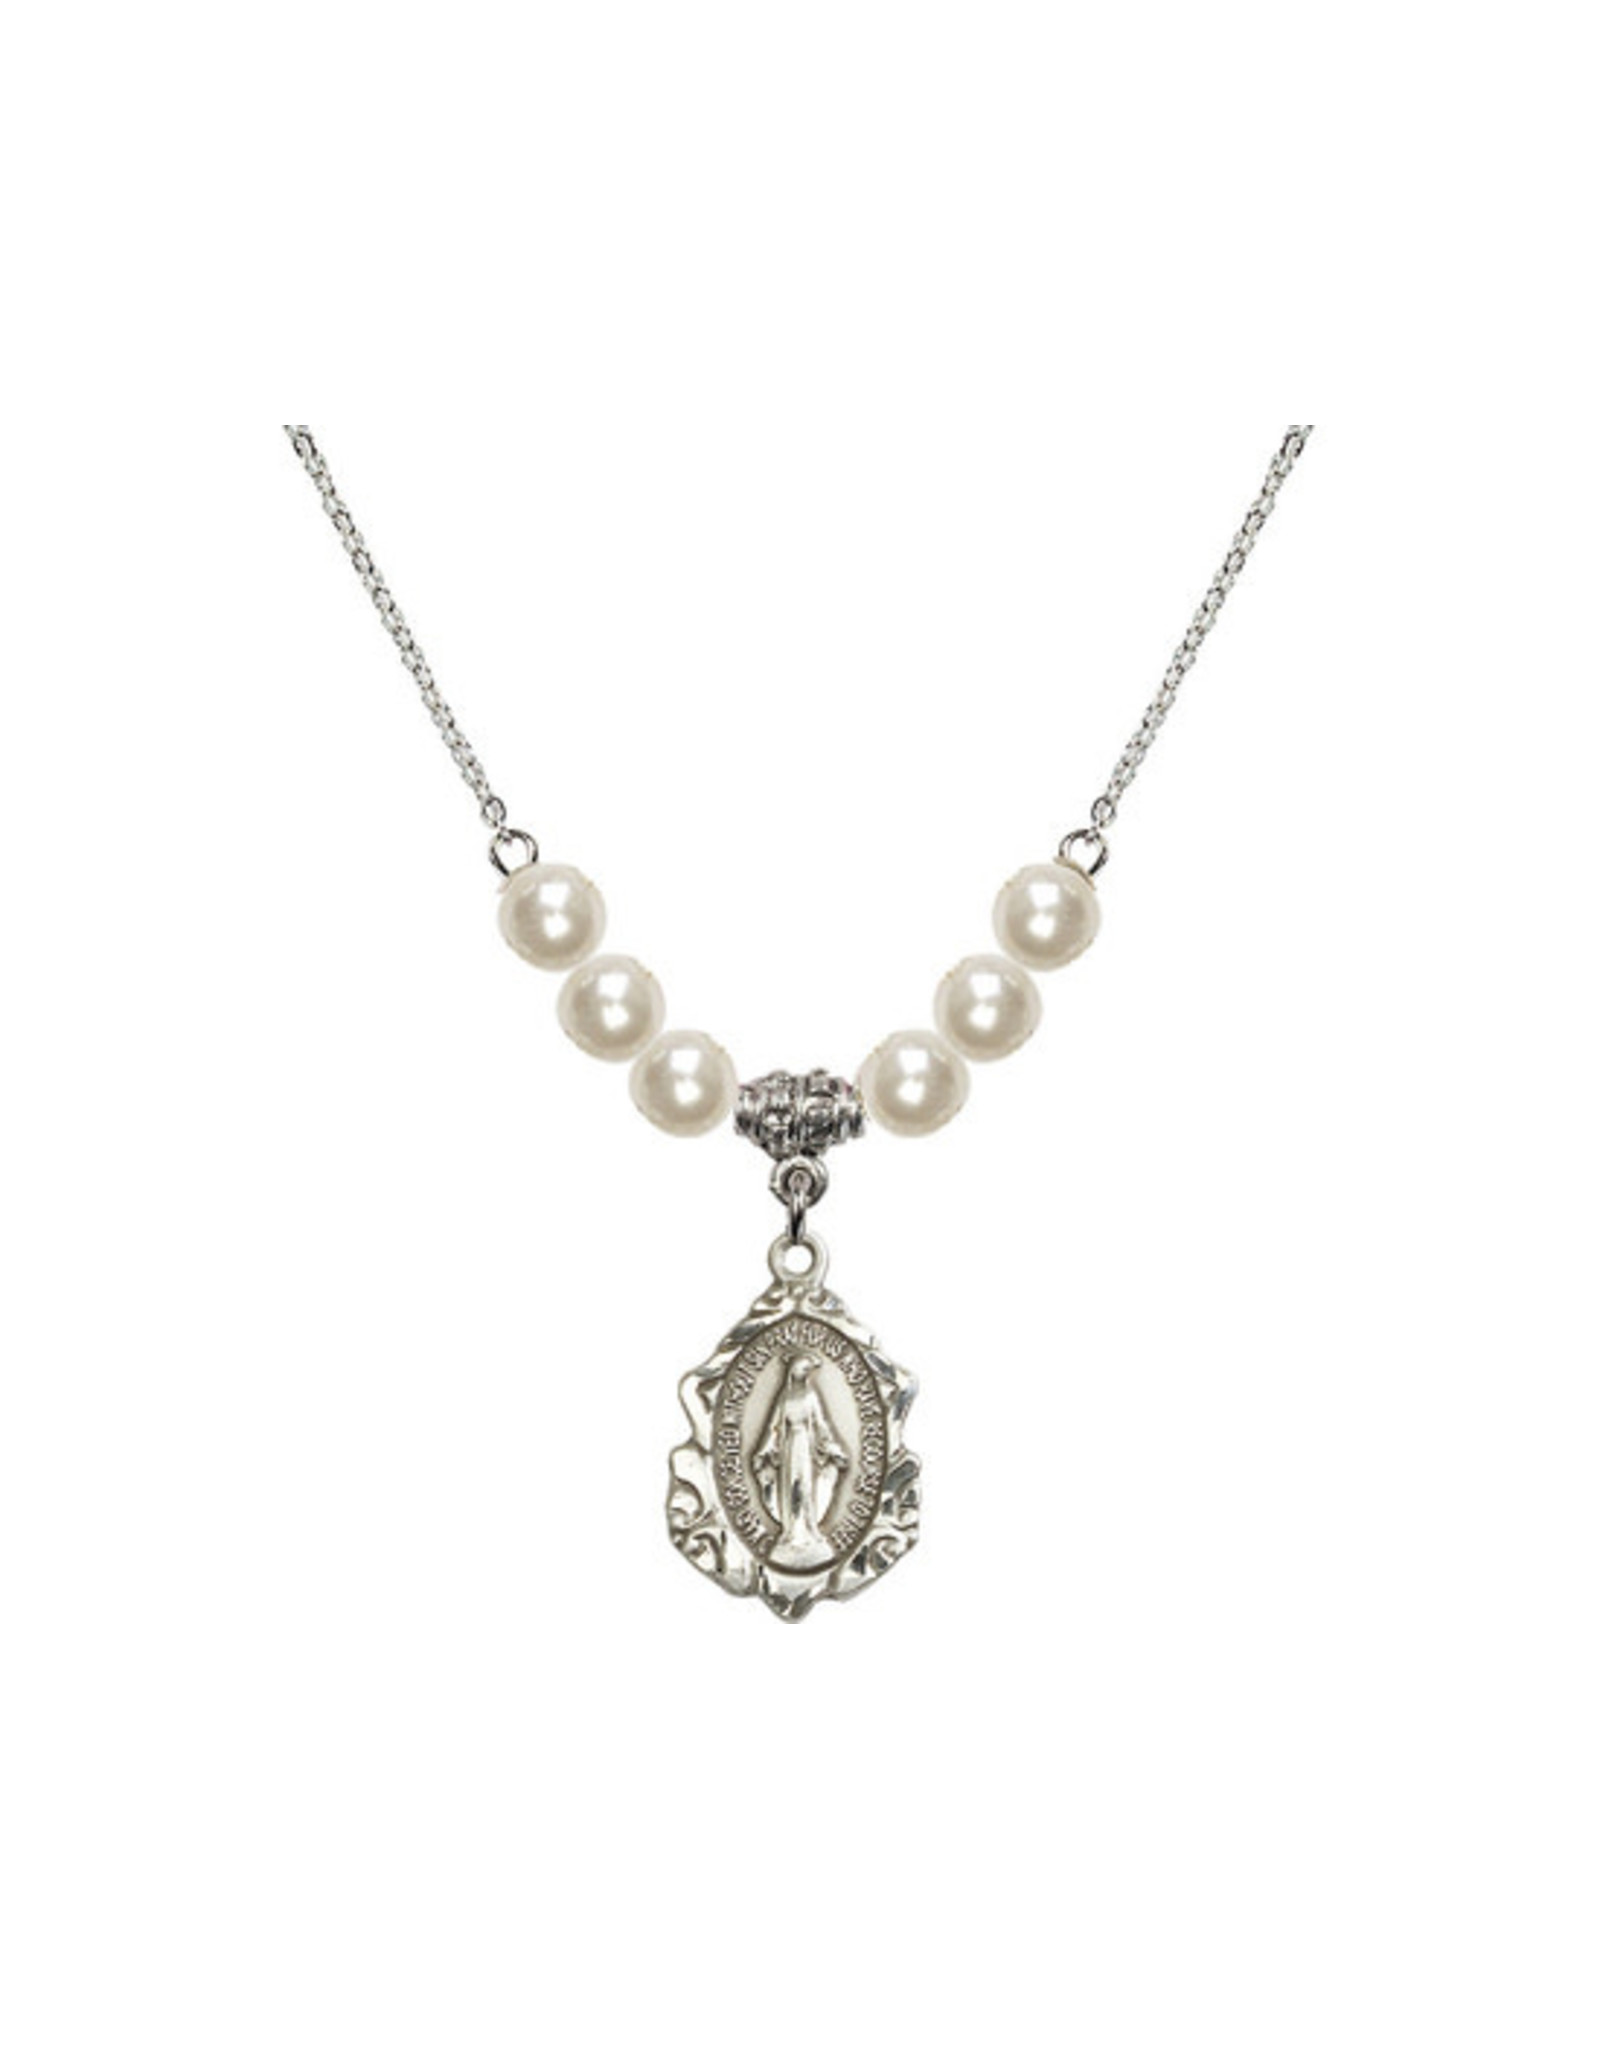 Bliss Miraculous Medal Necklace, Sterling Silver with Faux Pearls